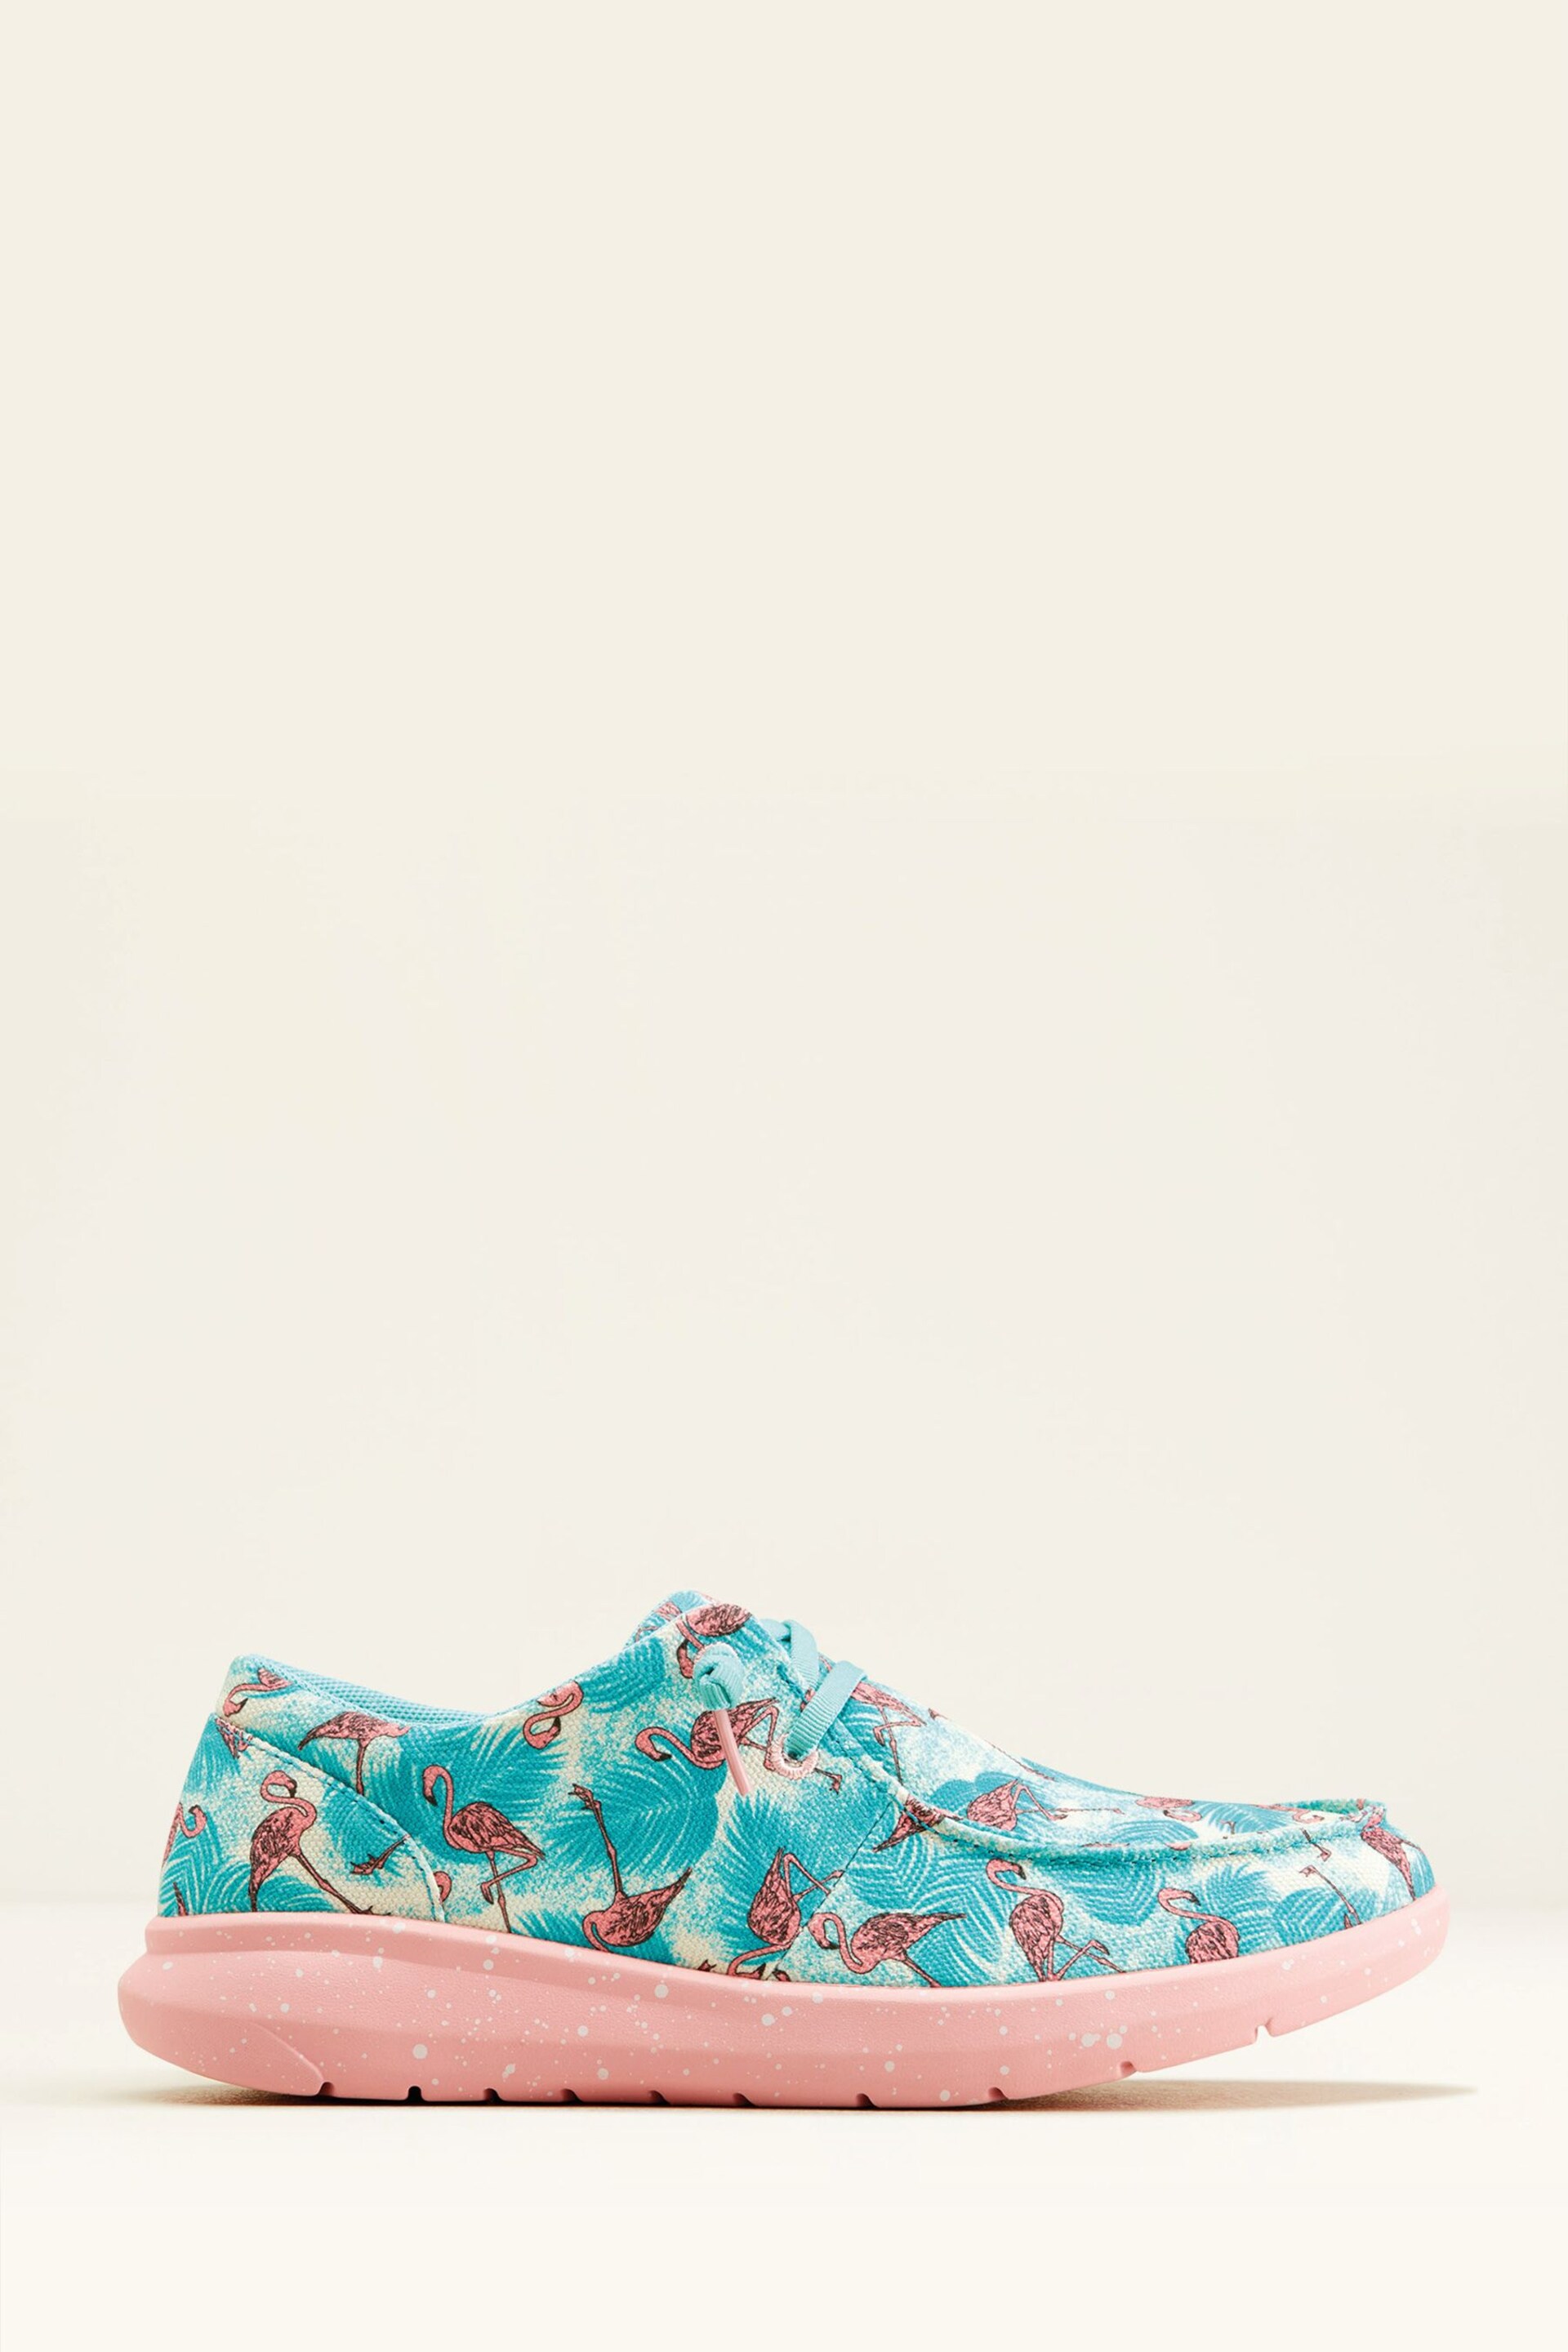 Ariat Hilo Casual Canvas Blue/Pink Shoes - Image 1 of 4